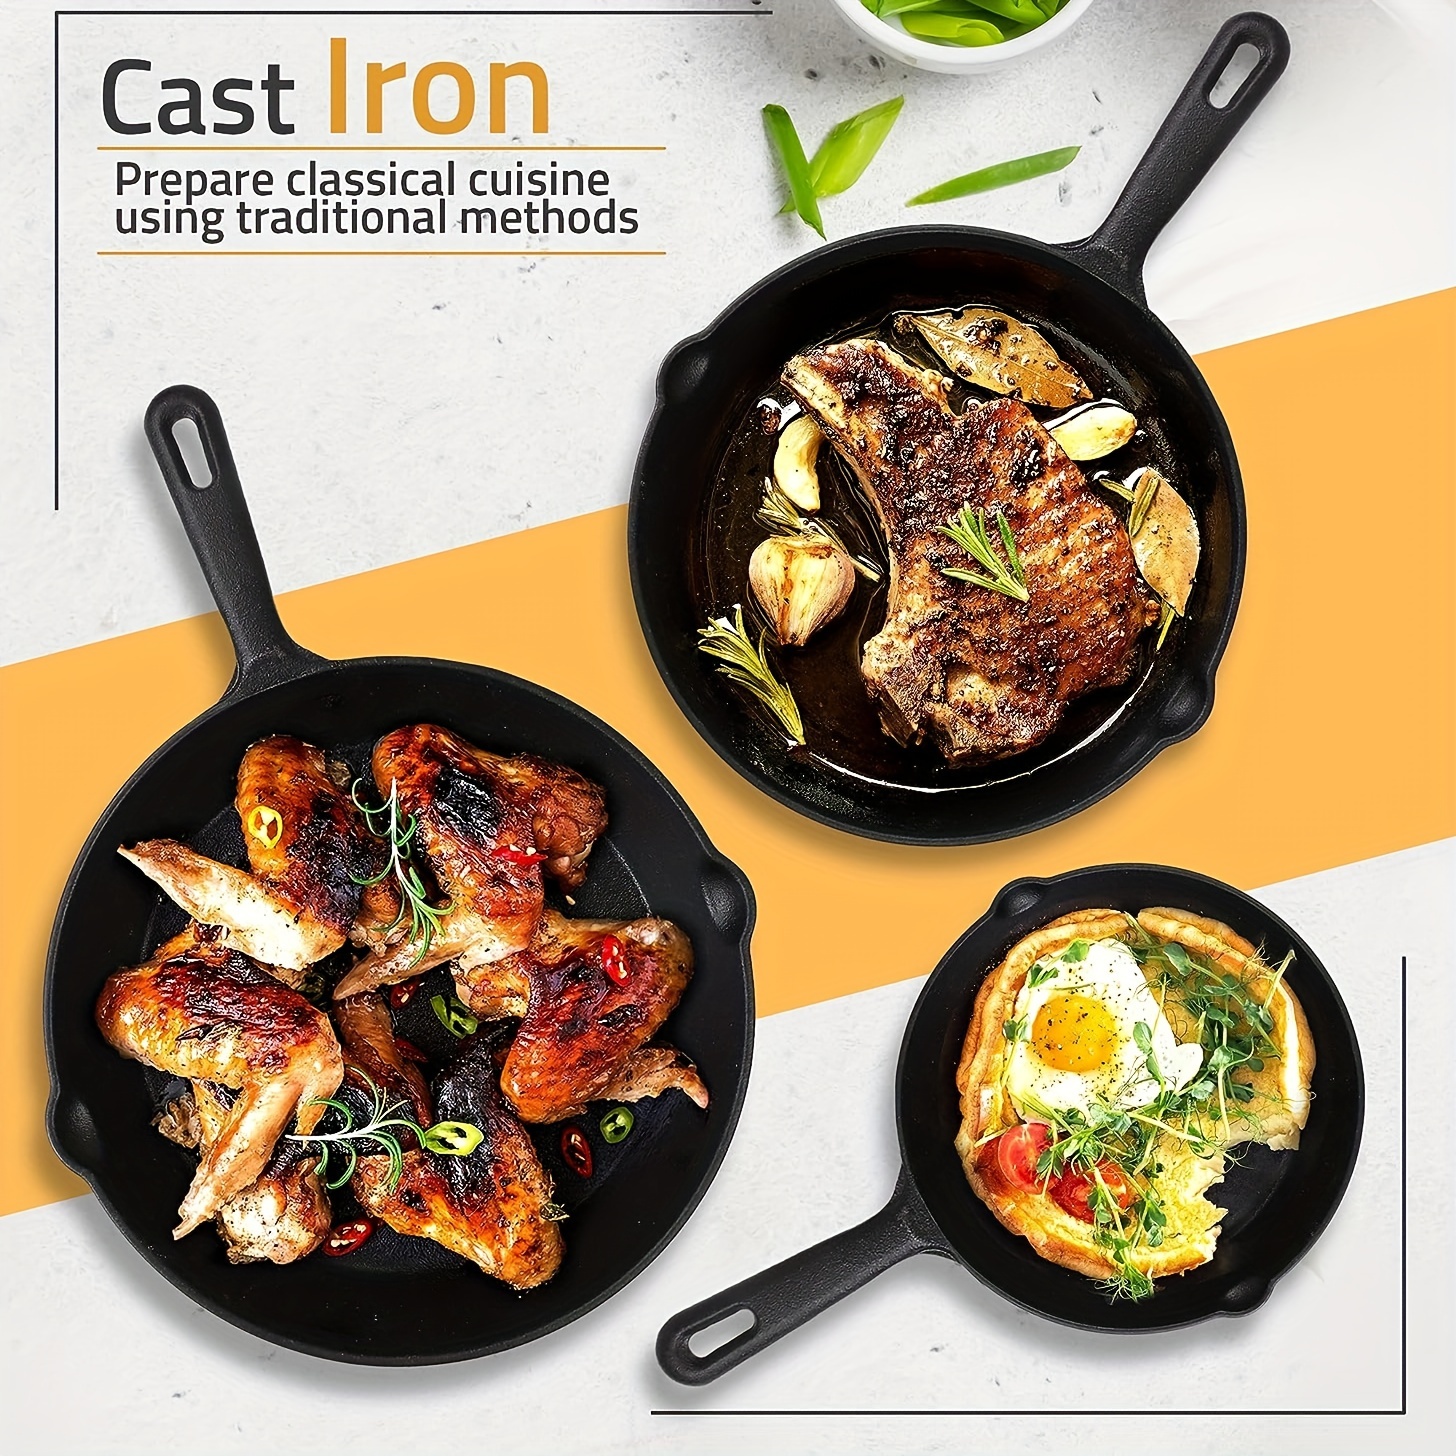 Pre-Seasoned Cast Iron Skillet- 12 inch for Home, Camping, Indoor and  Outdoor Cooking, Frying, Searing and Baking by Classic Cuisine